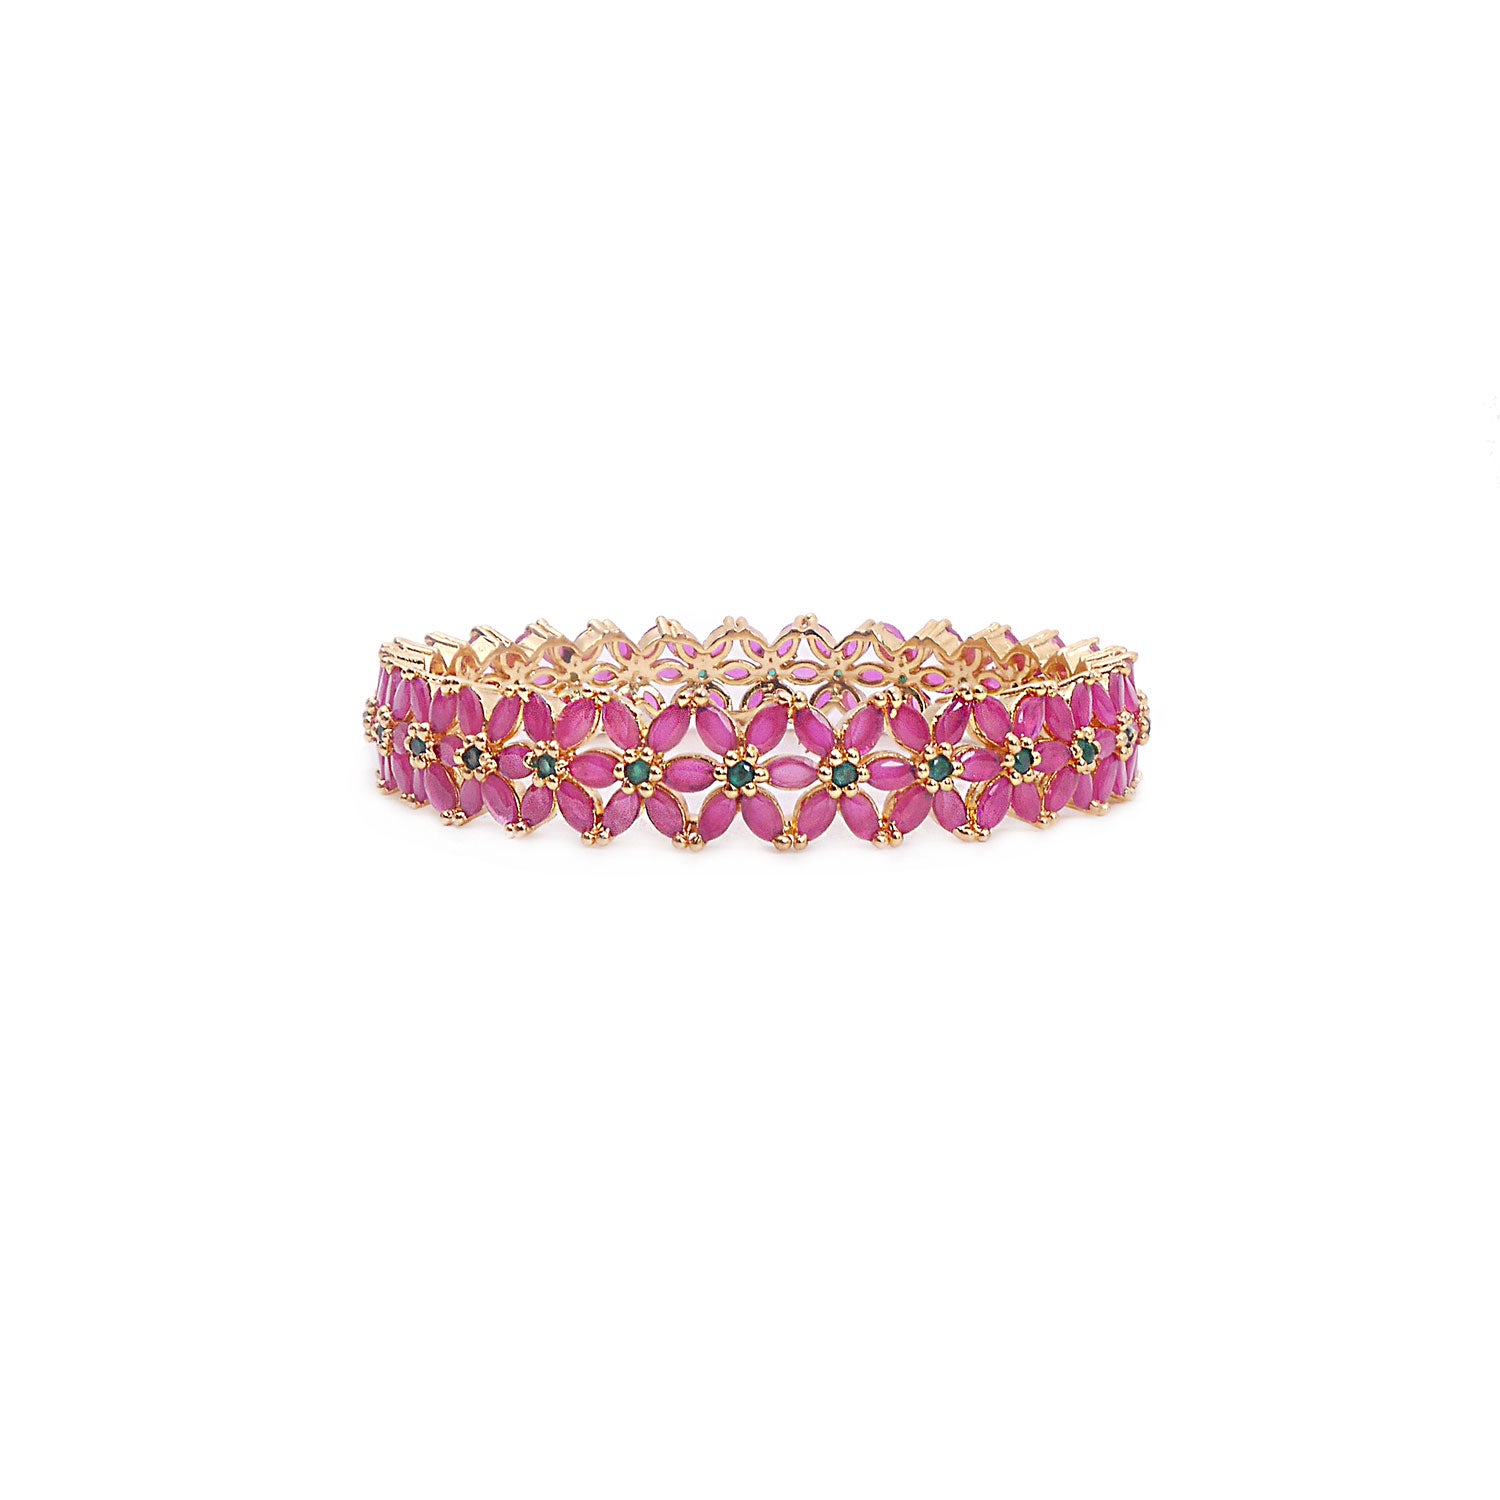 Nyla Cubic Zirconia Bangle in Ruby and Green